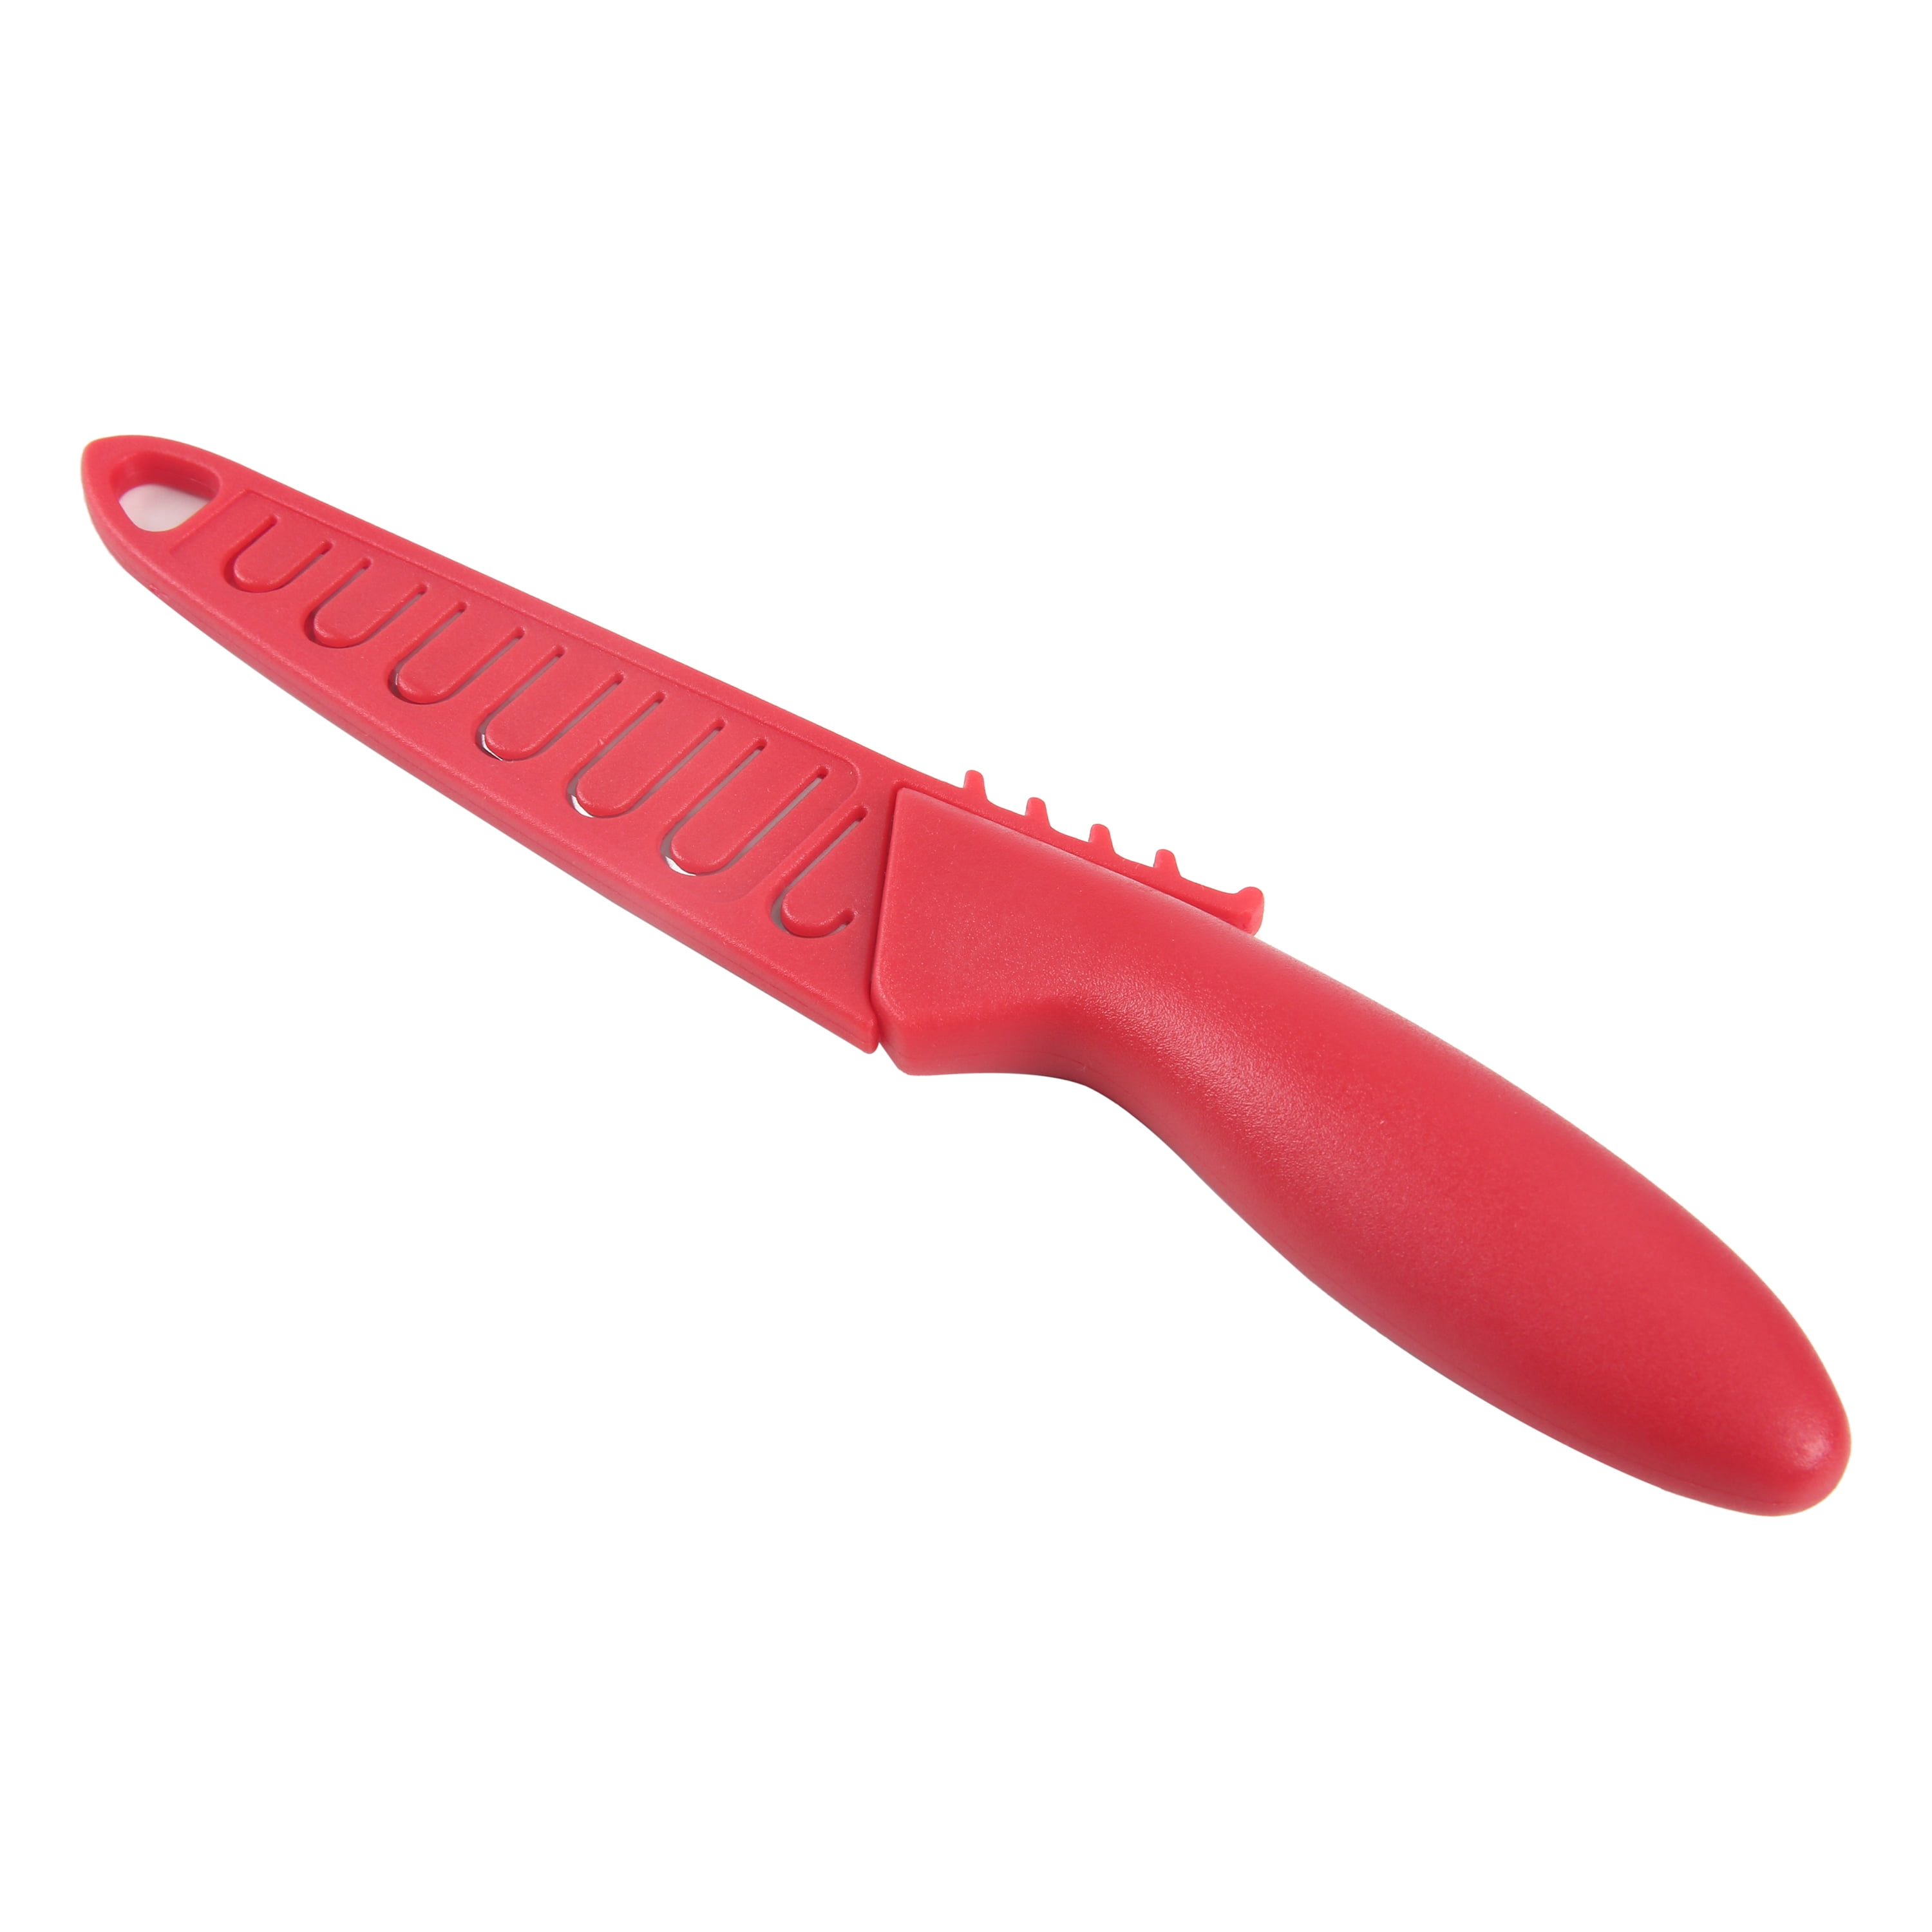 True 8165 3.5 in. Paring Knife with Sheath, Assorted Color